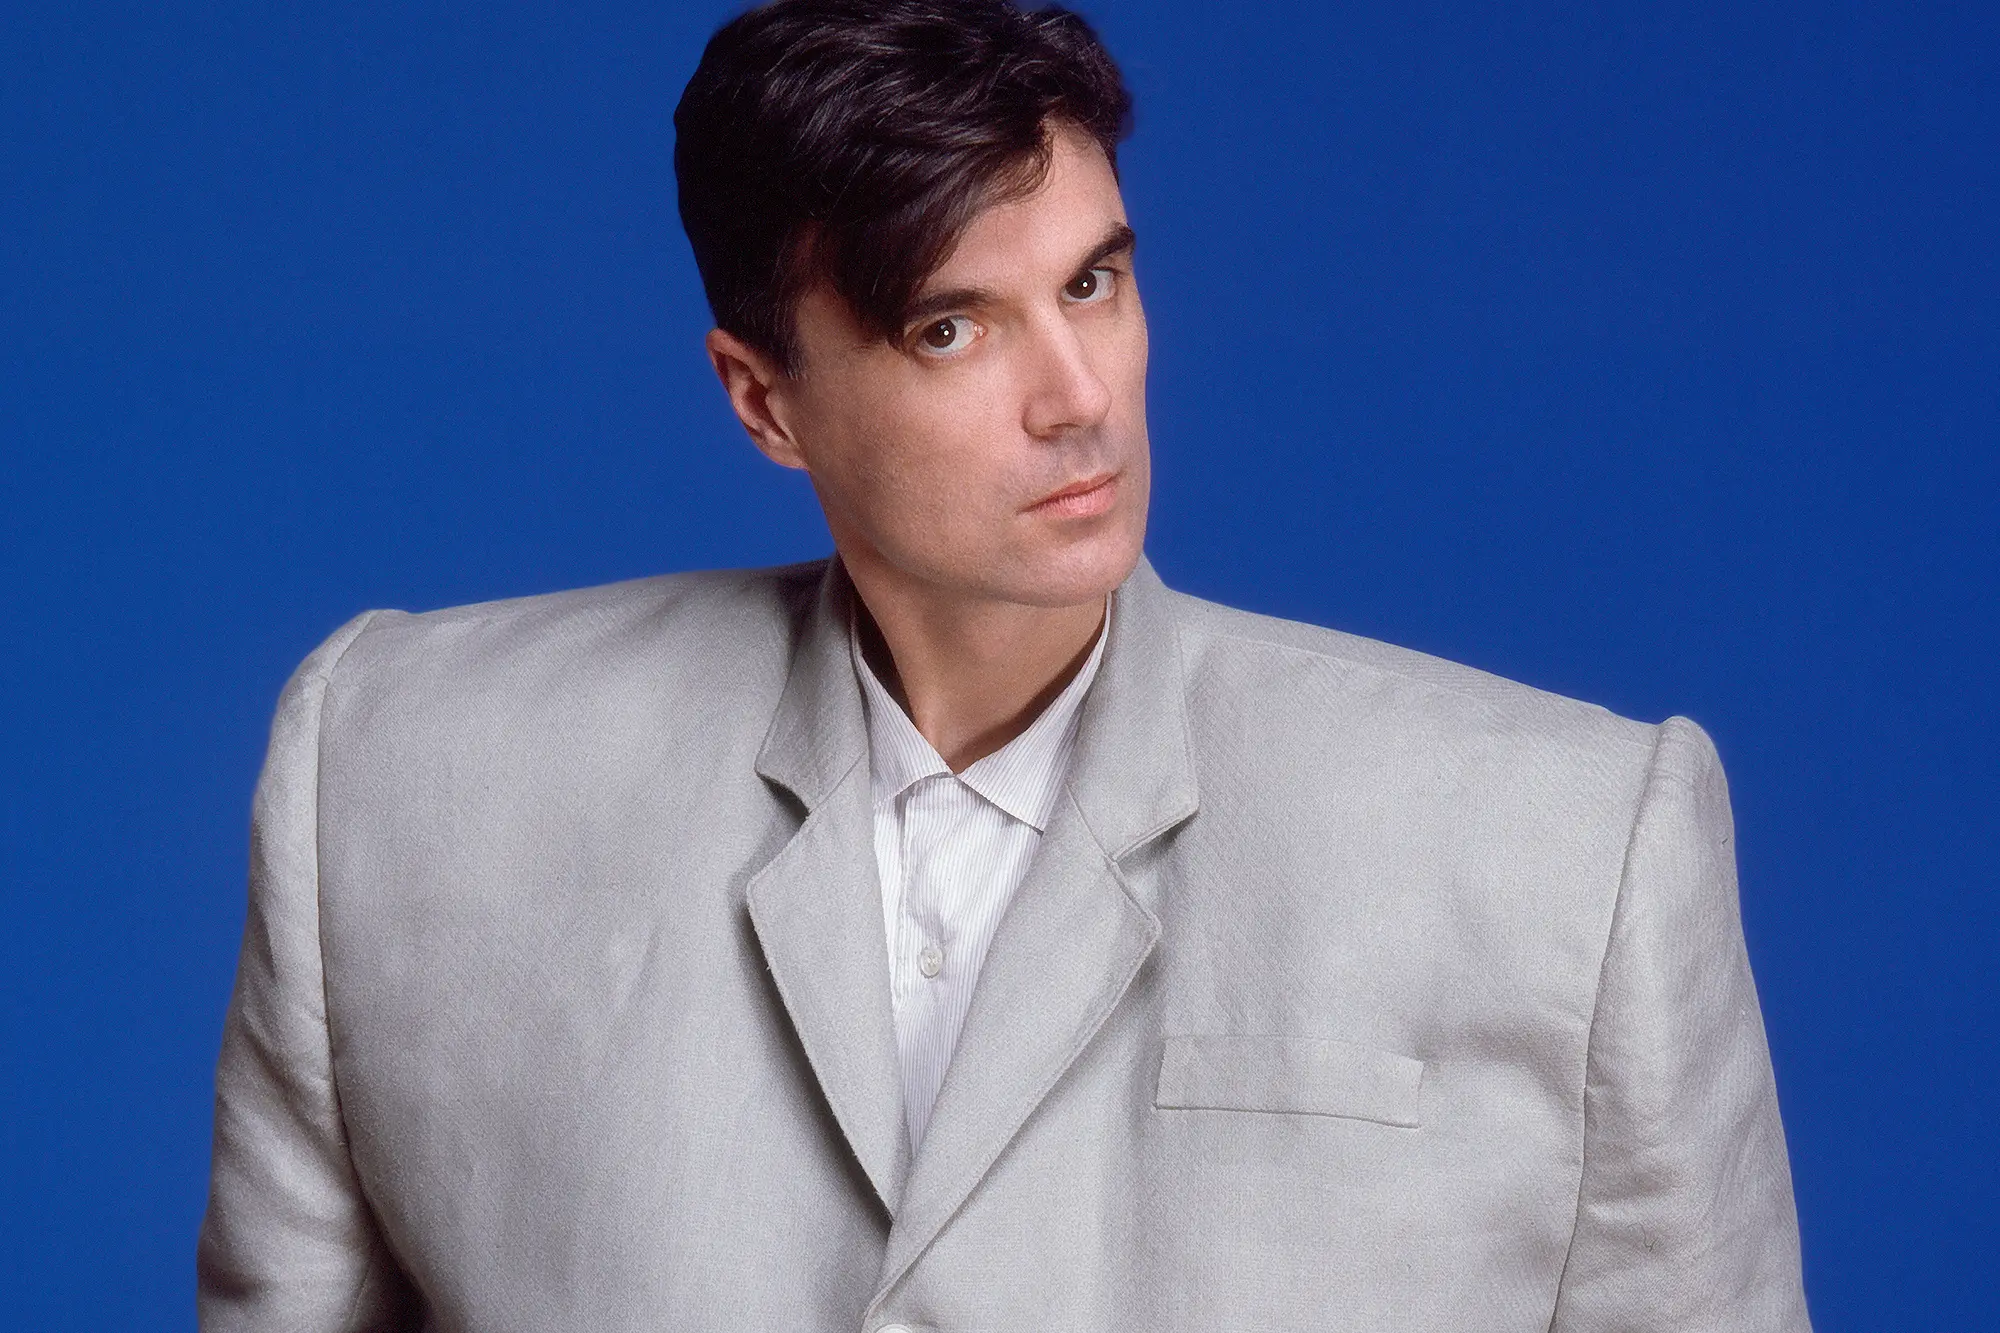 A young David Byrne, drummer and founder of the rock band "Talking Heads."